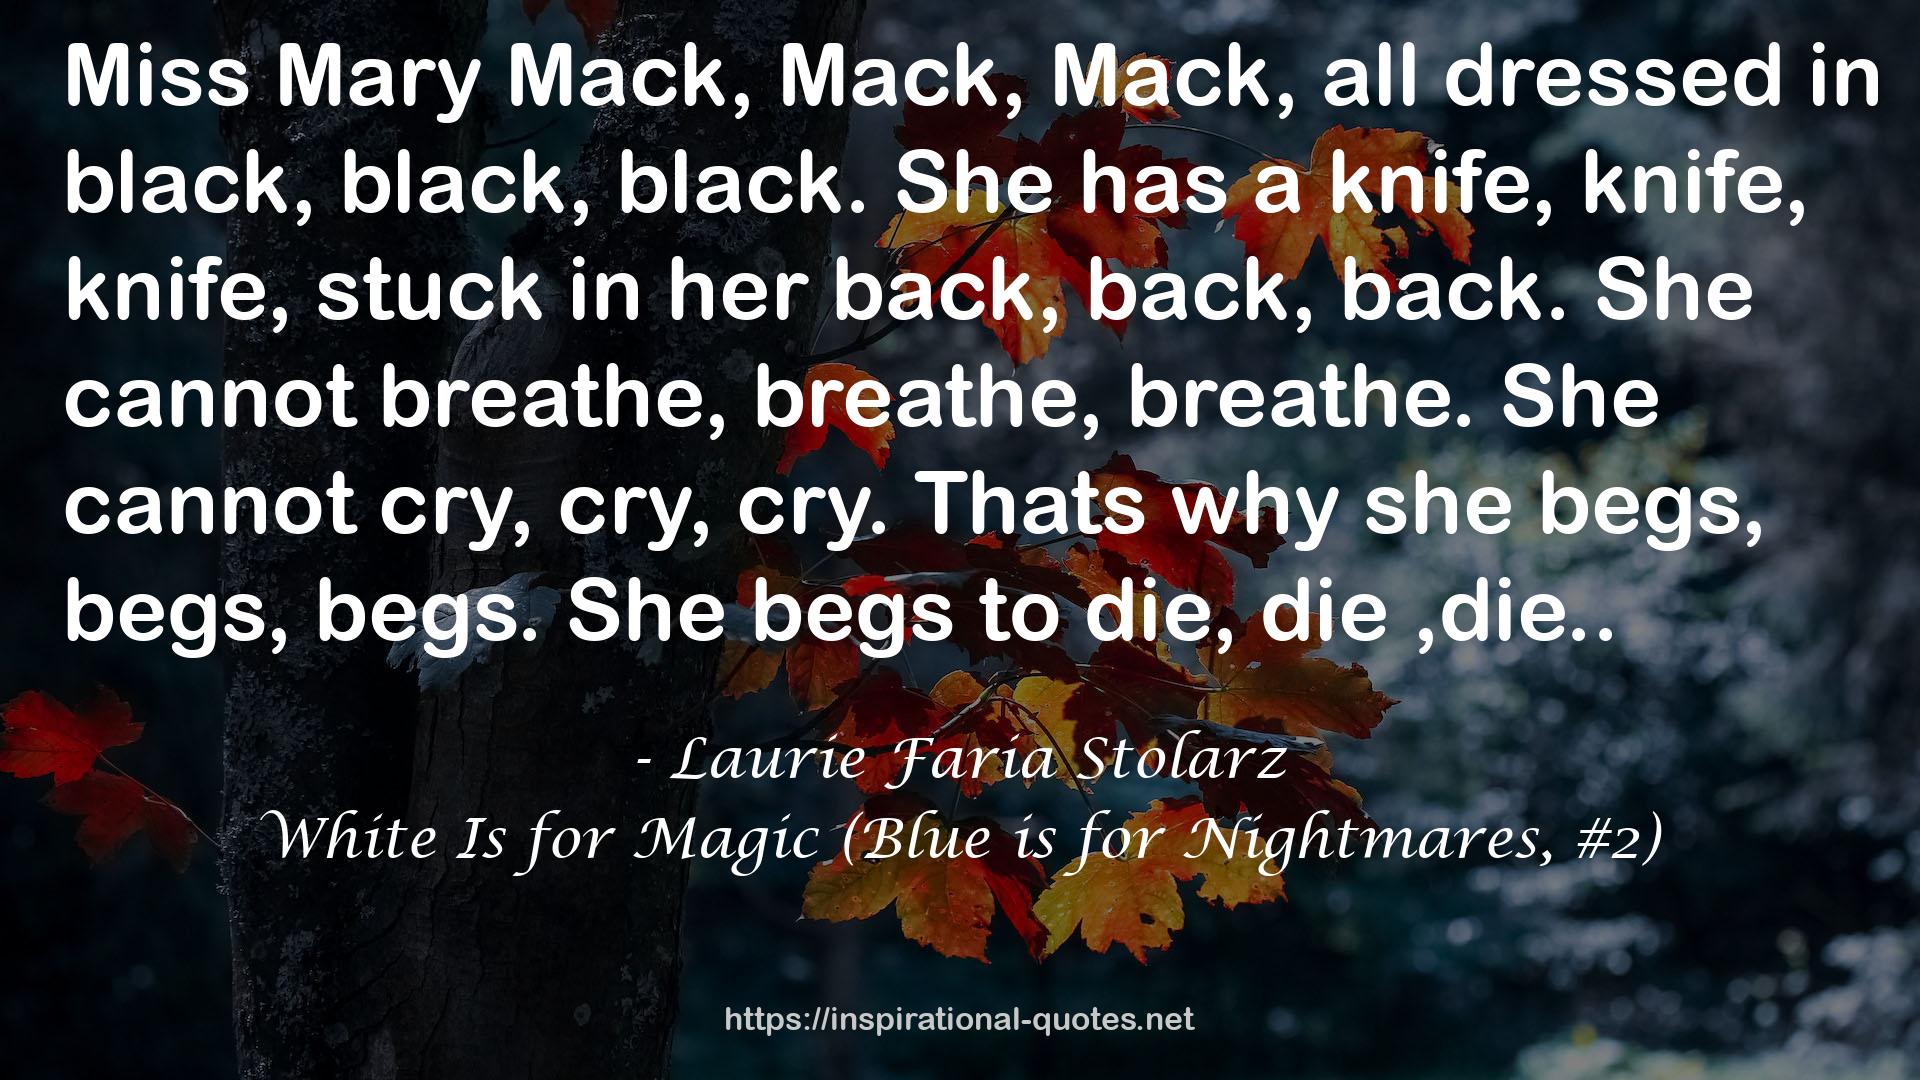 White Is for Magic (Blue is for Nightmares, #2) QUOTES